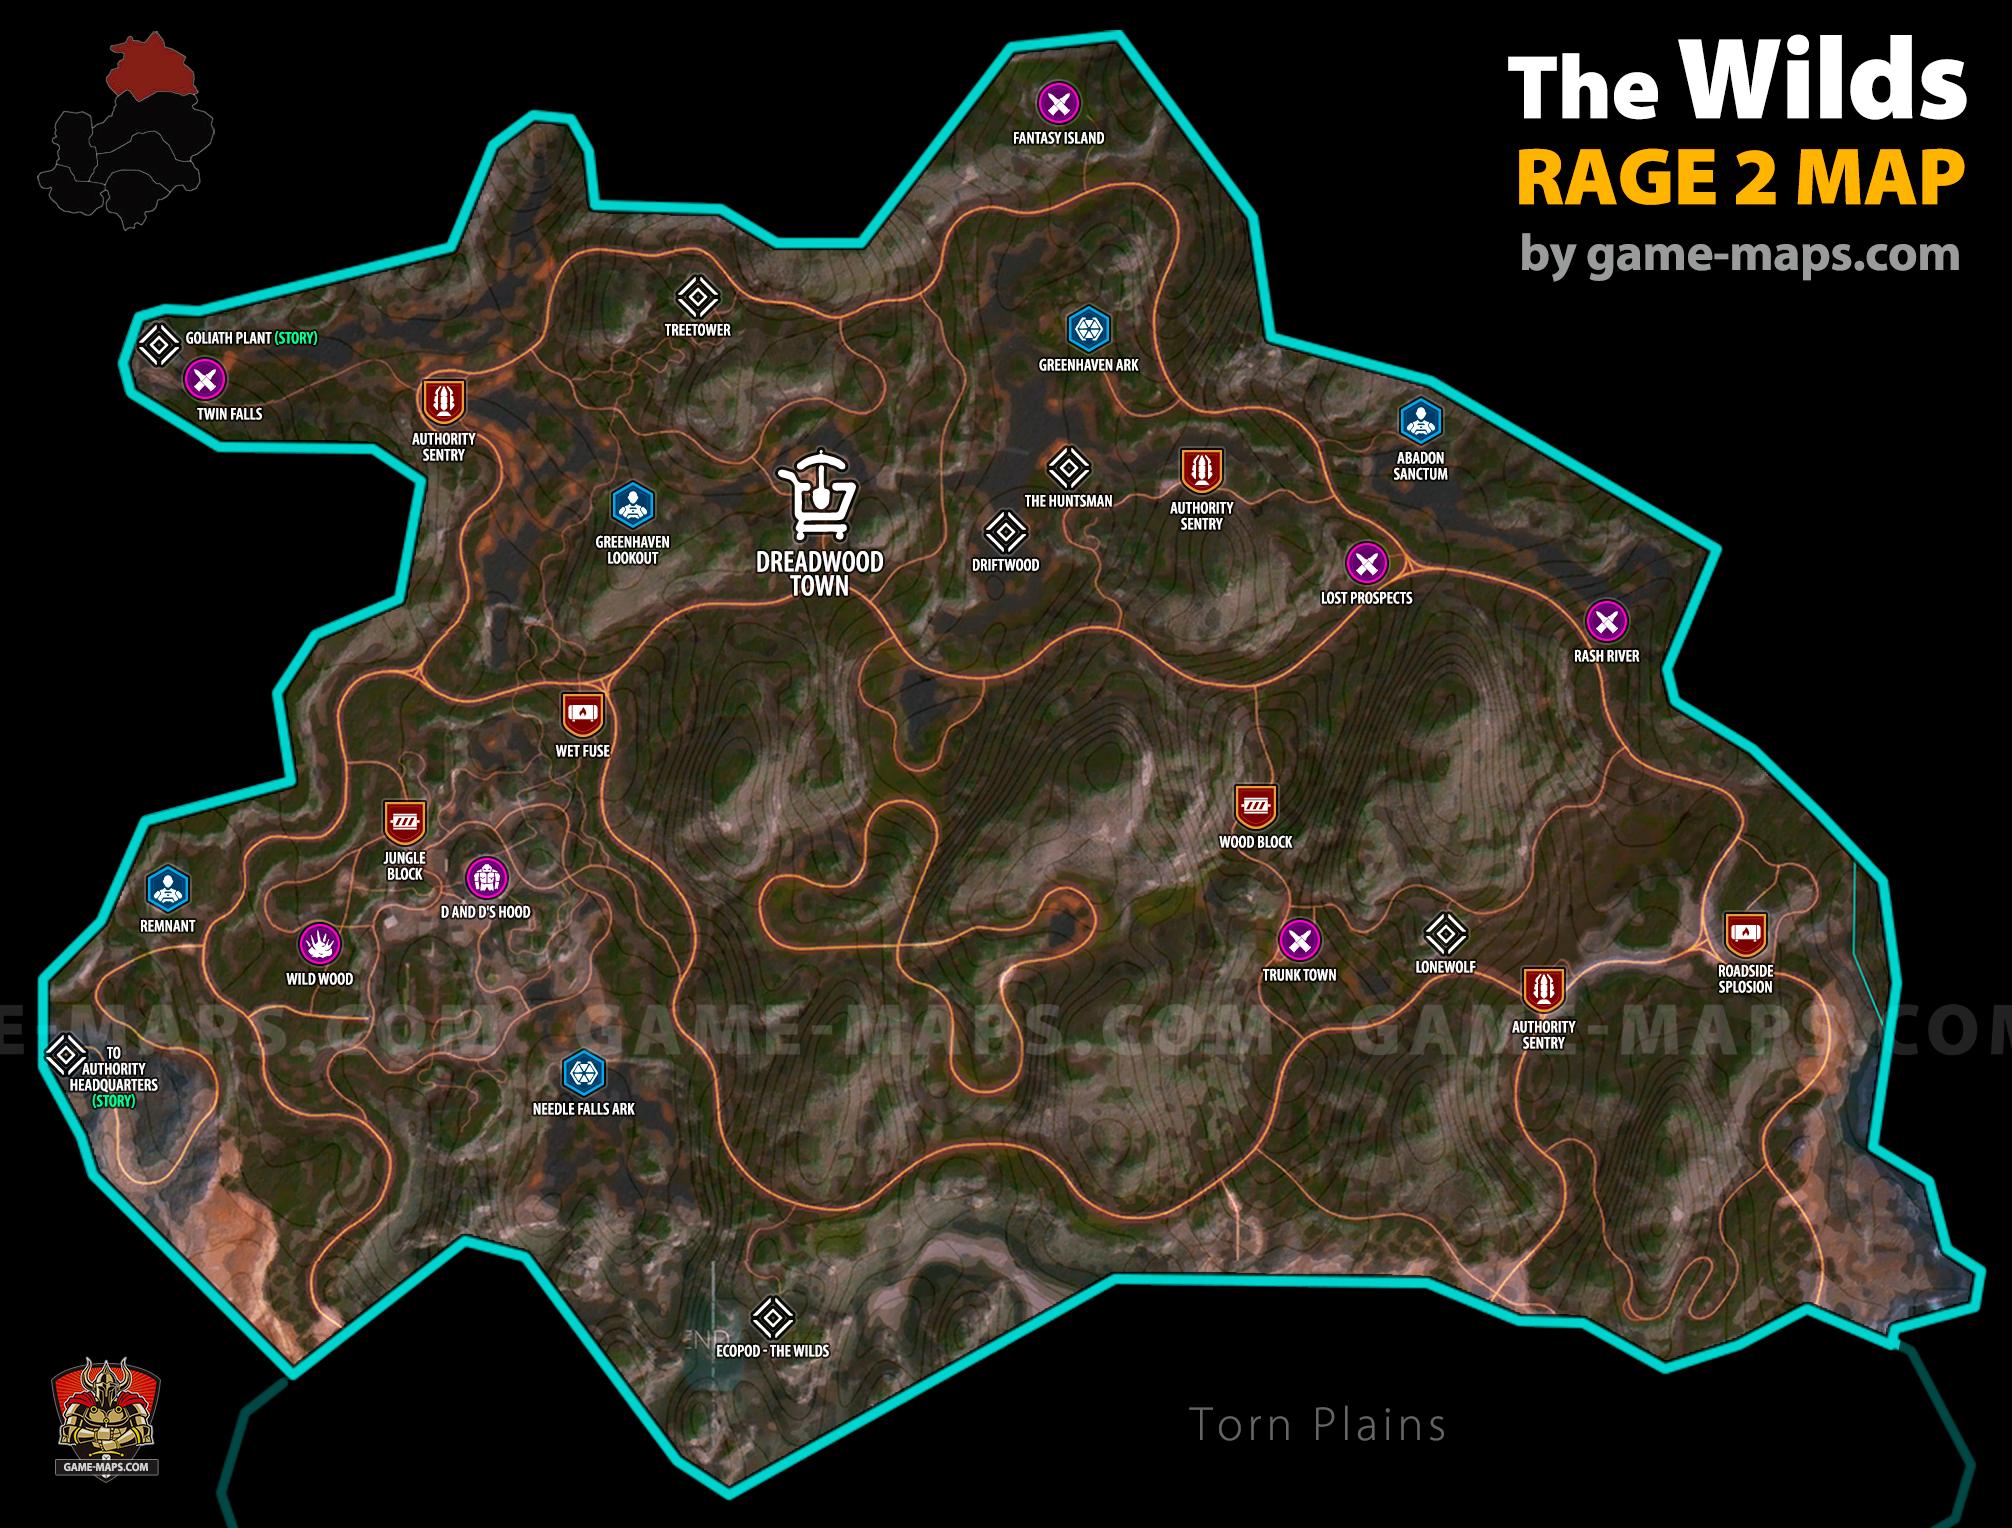 The Wilds - Rage 2 Map with Locations